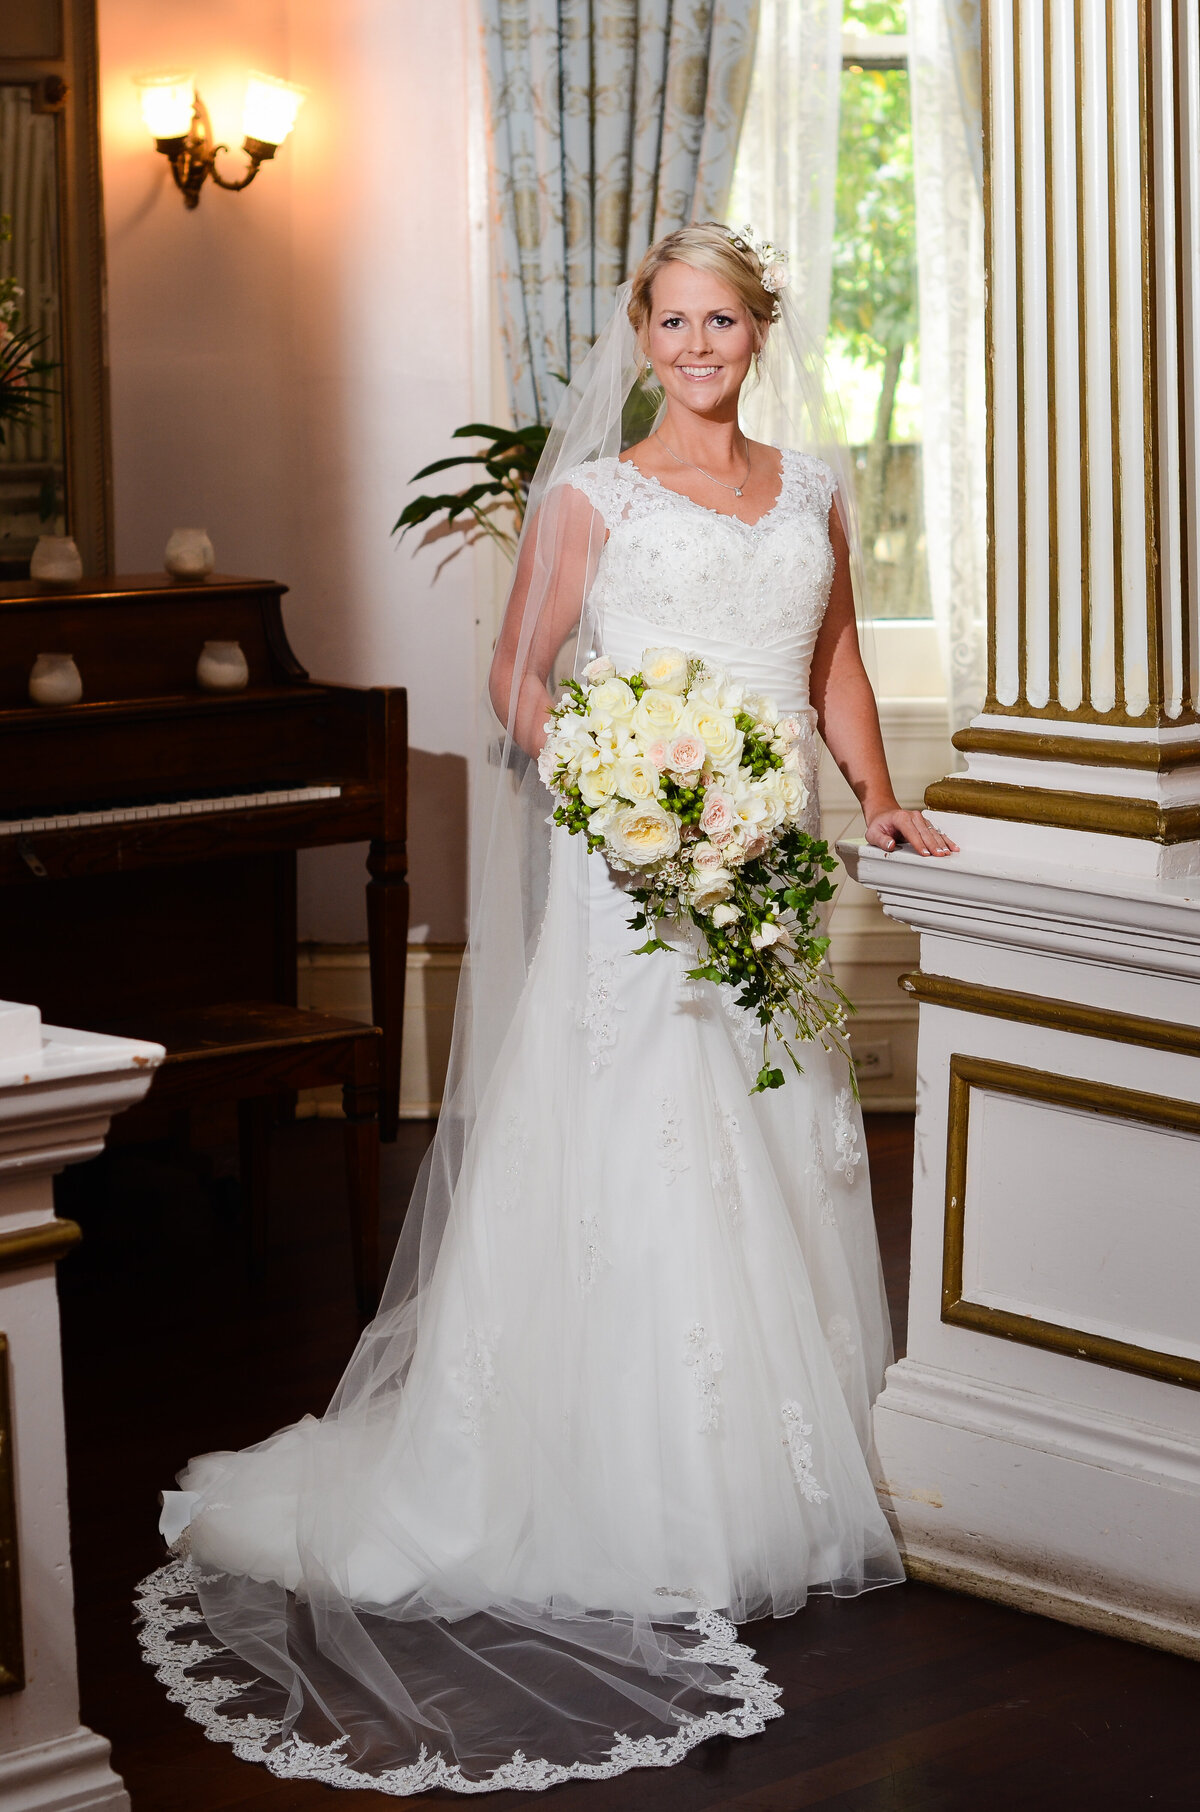 Beautiful bridal portrait: Formal Bridal portrait at The Columns Hotel on St. Charles in New Orleans, NOLA Wedding